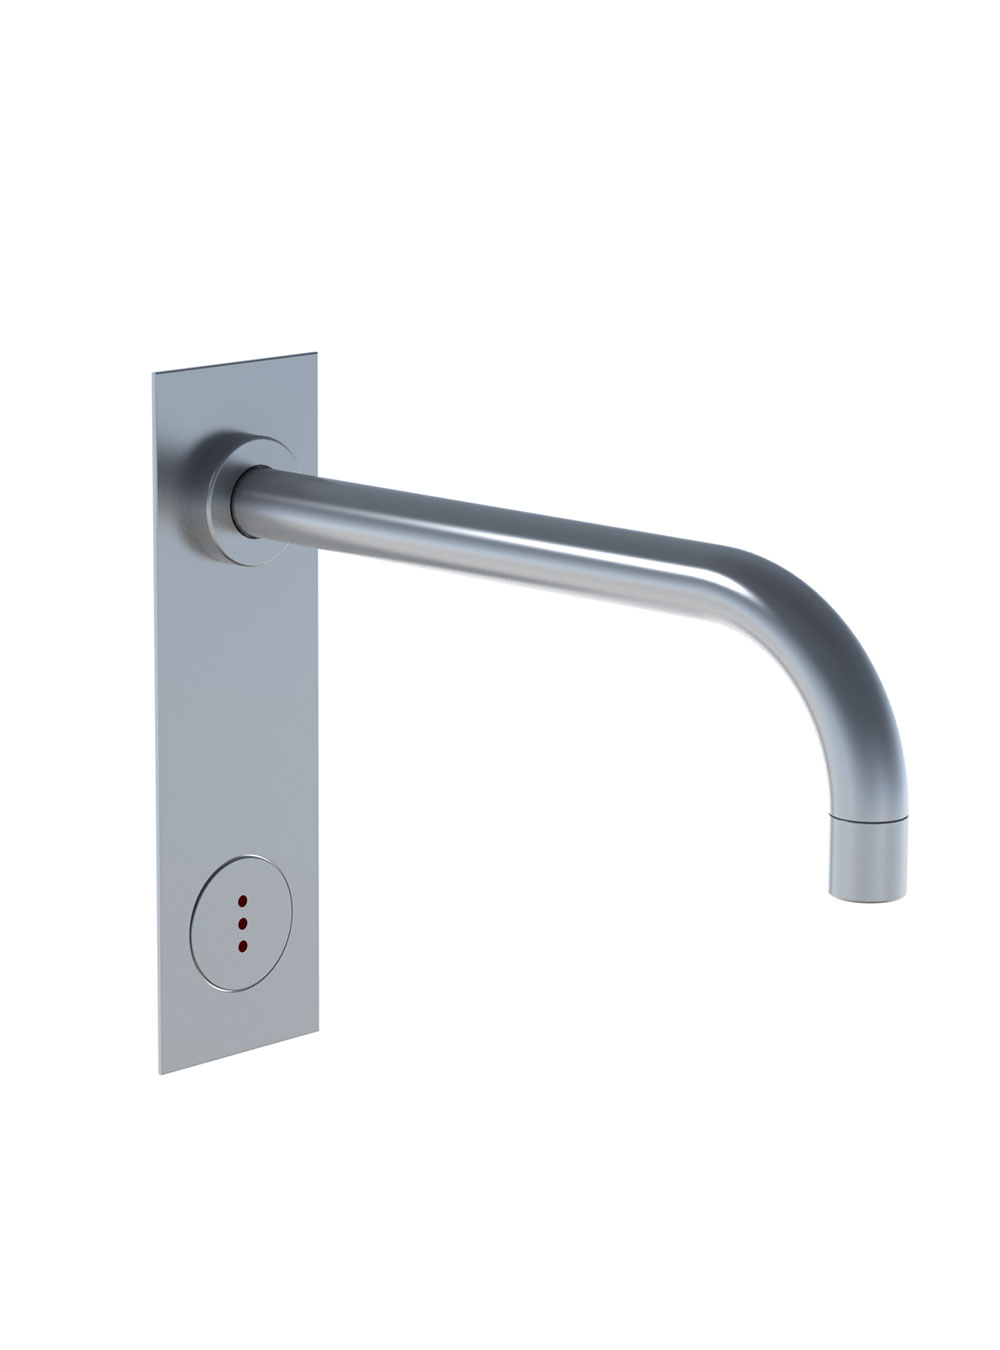 4322: Build-in basin tap with on-off sensor for ‘hands free’ operation. For vertical mounting.Sensor al...